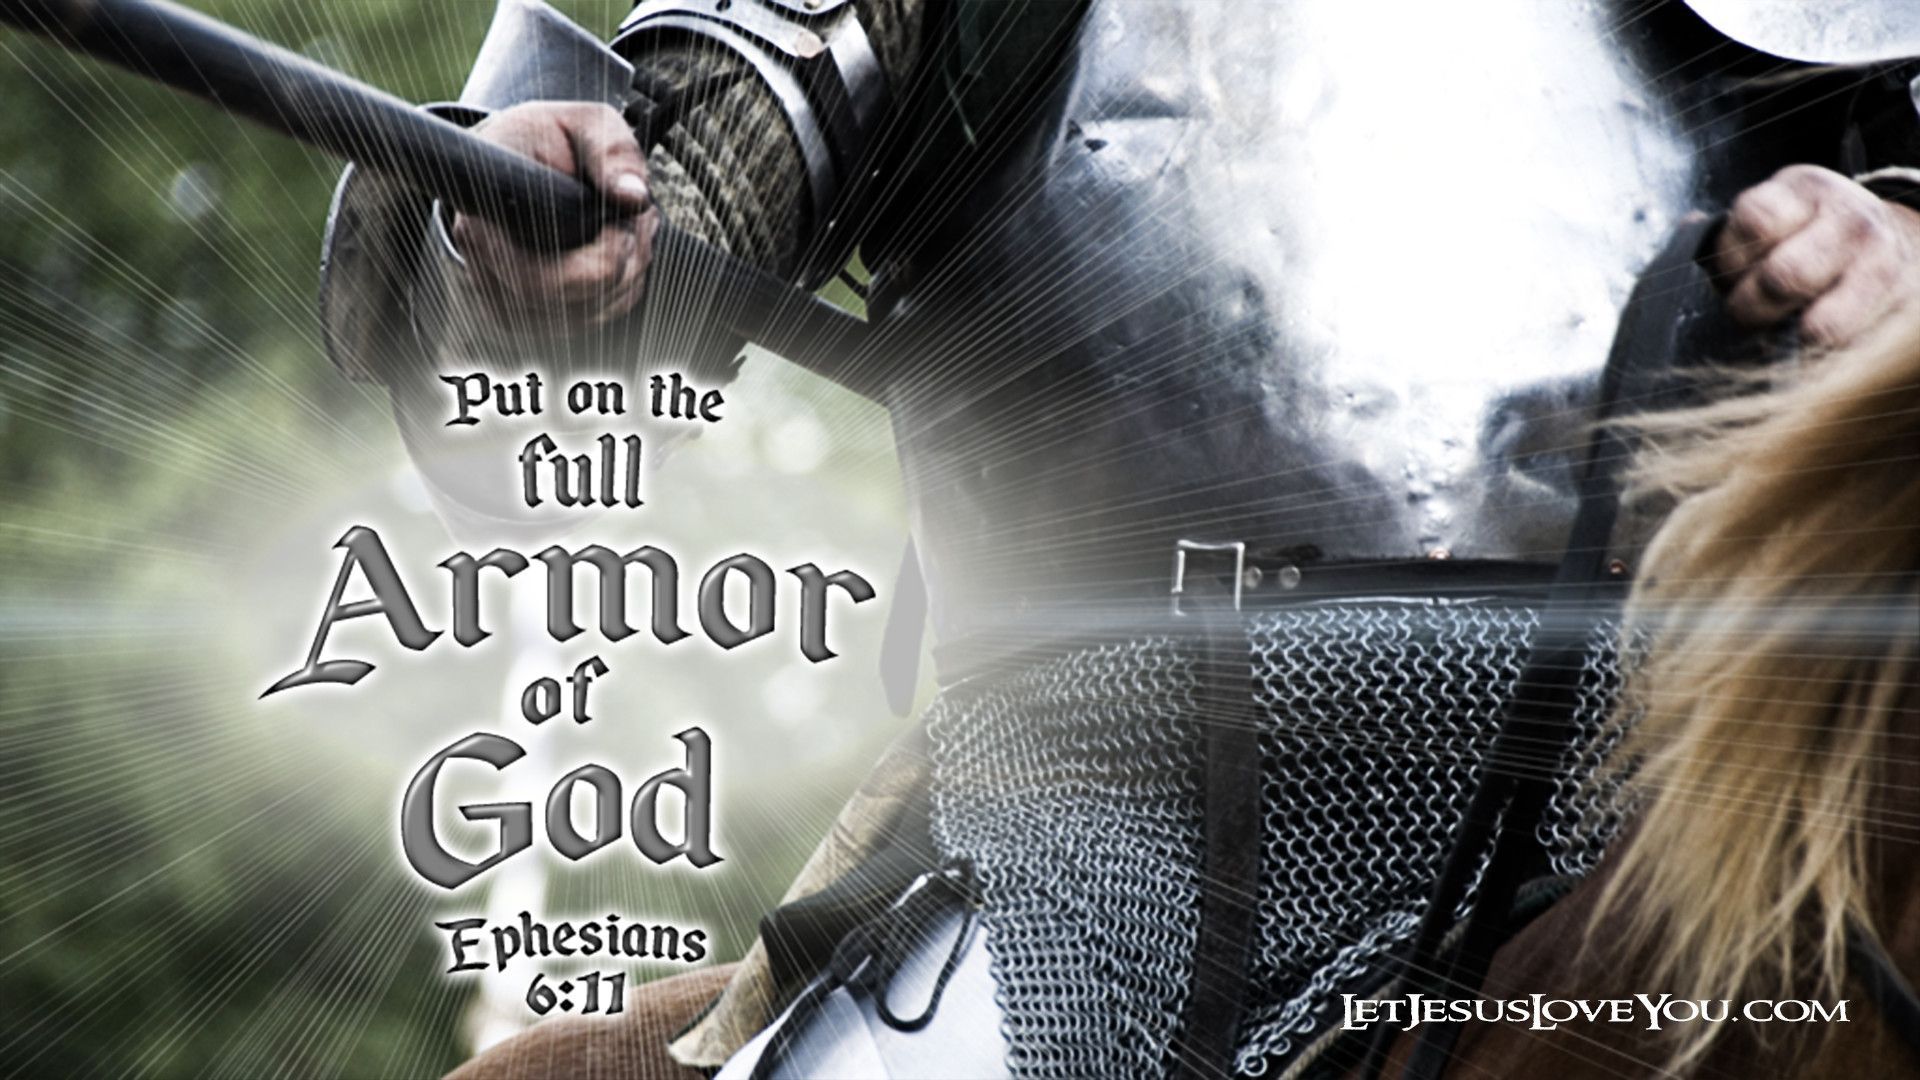 Ephesians 613 WEB Mobile Phone Wallpaper  Therefore put on the whole  armor of God that